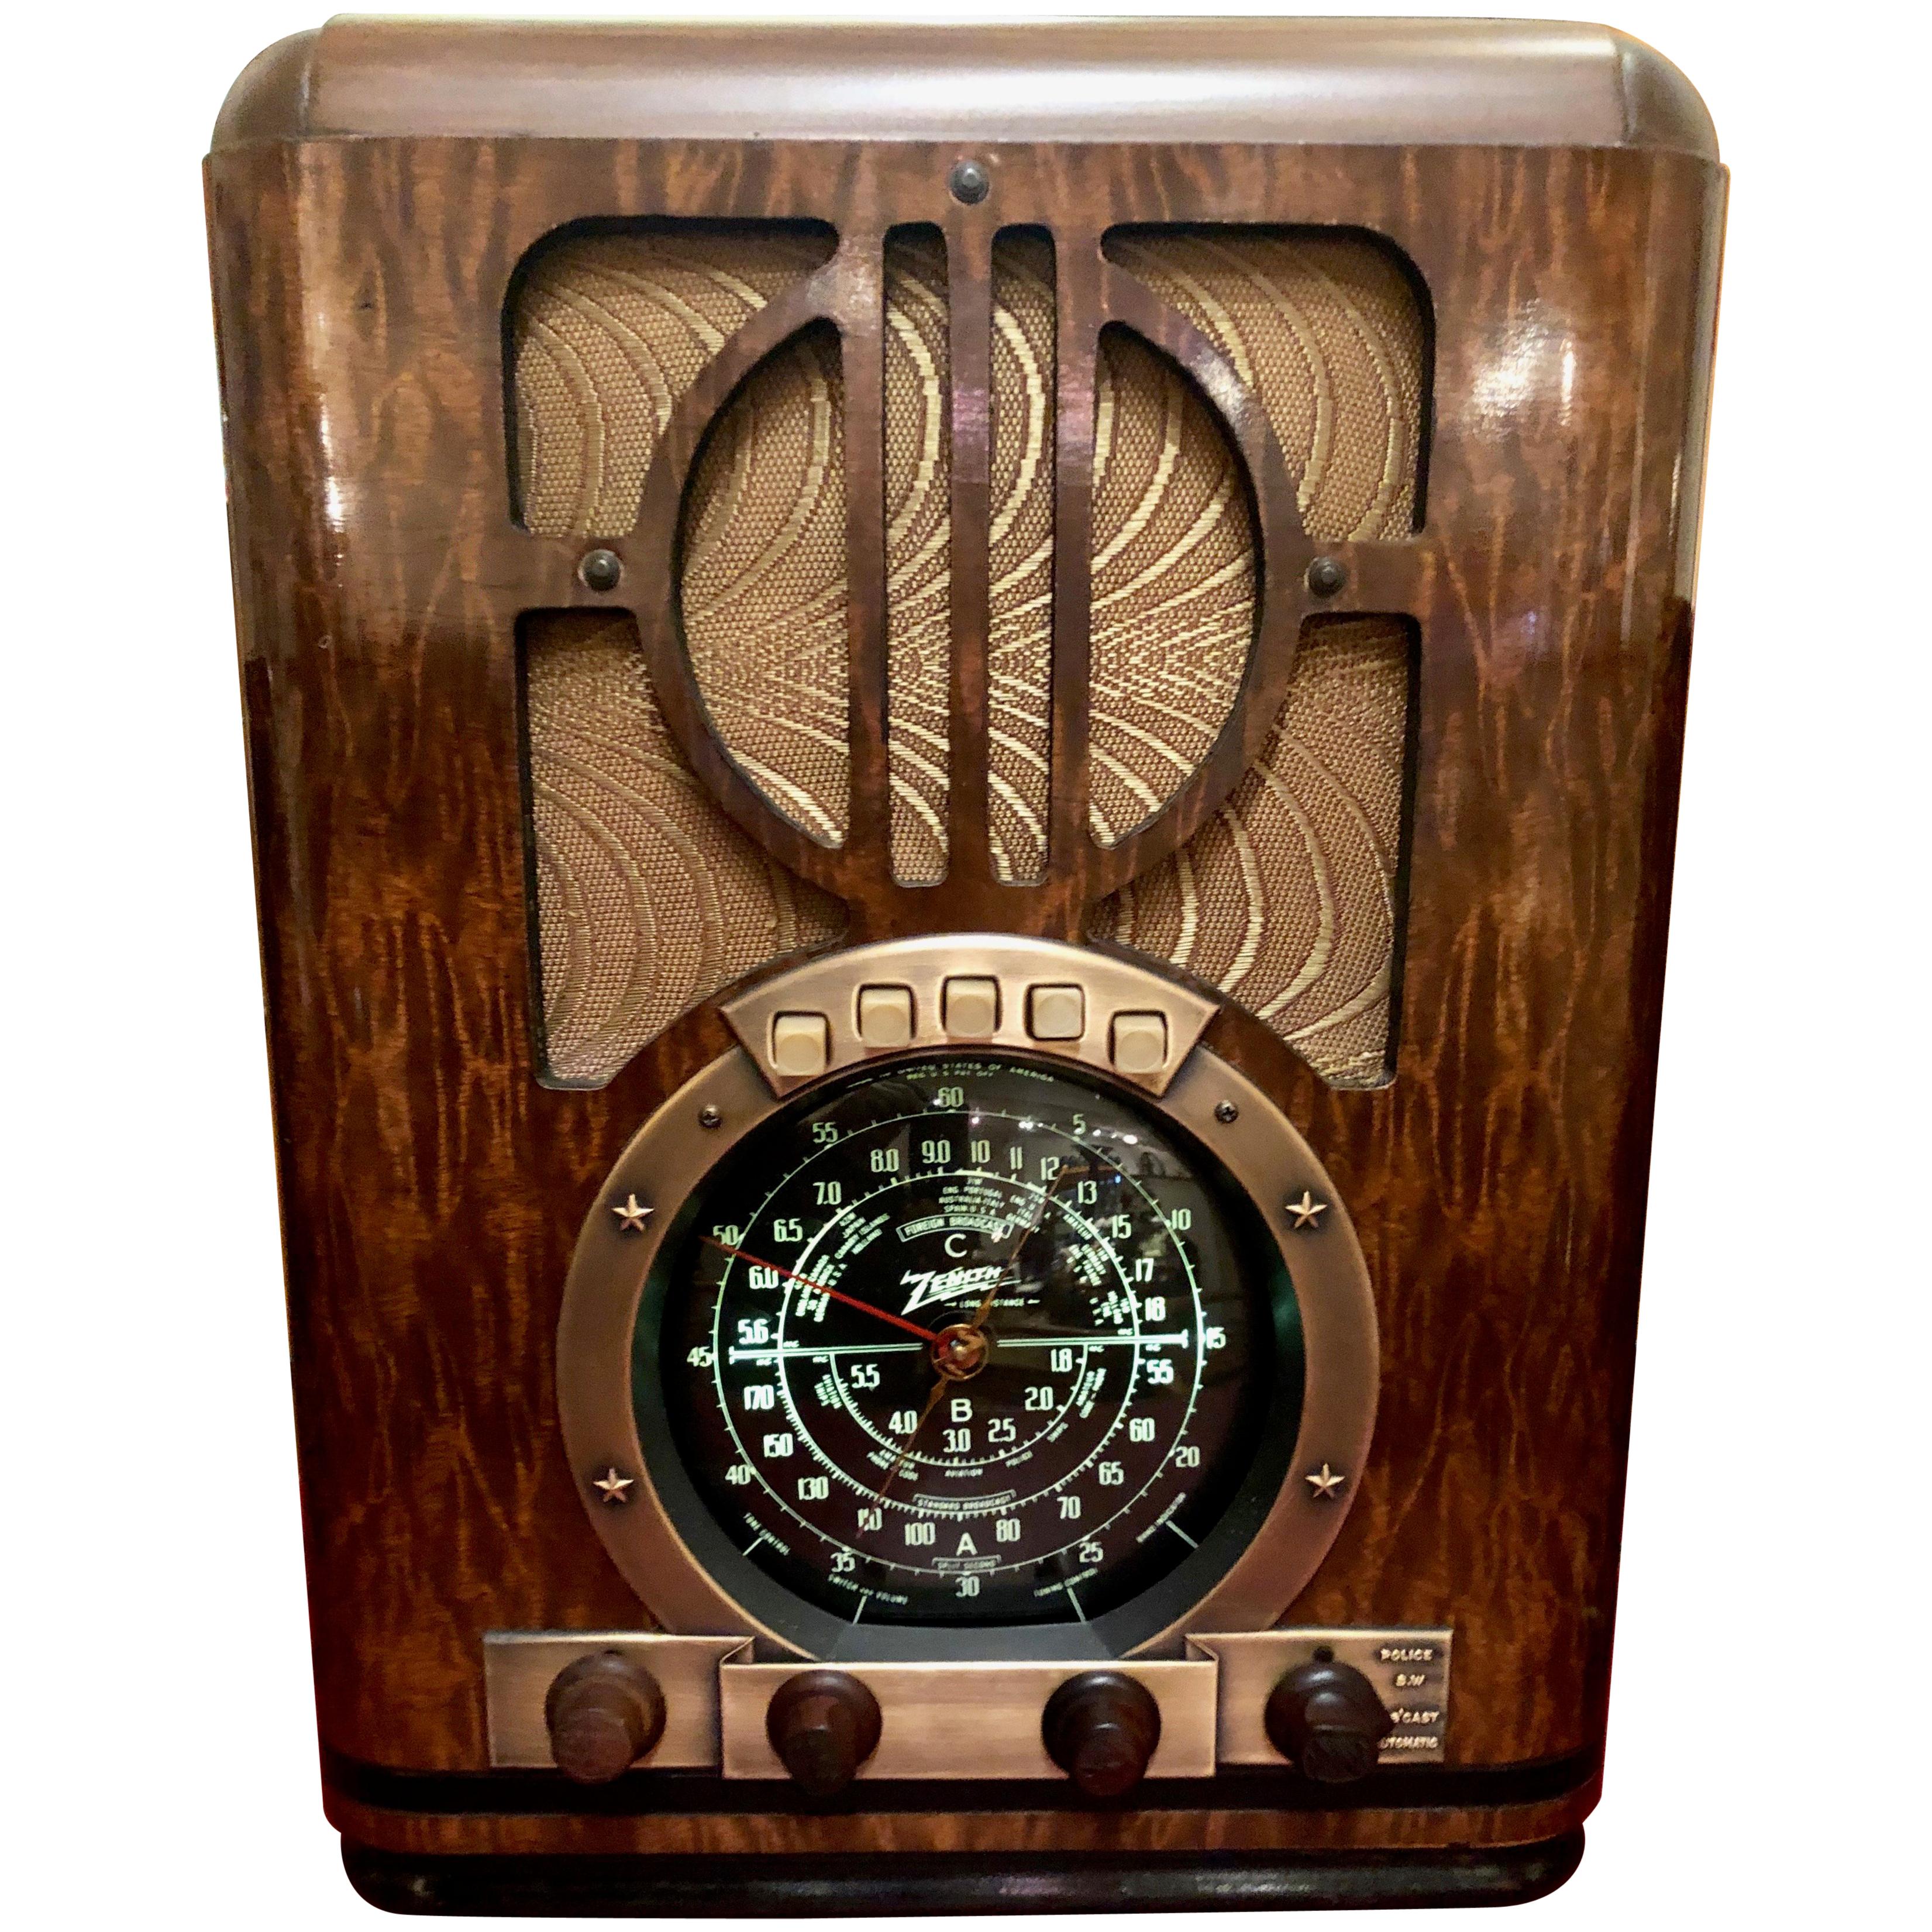 Zenith Antique '1937' 6-S-330 Tombstone Black Dial Tube Radio and Bluetooth